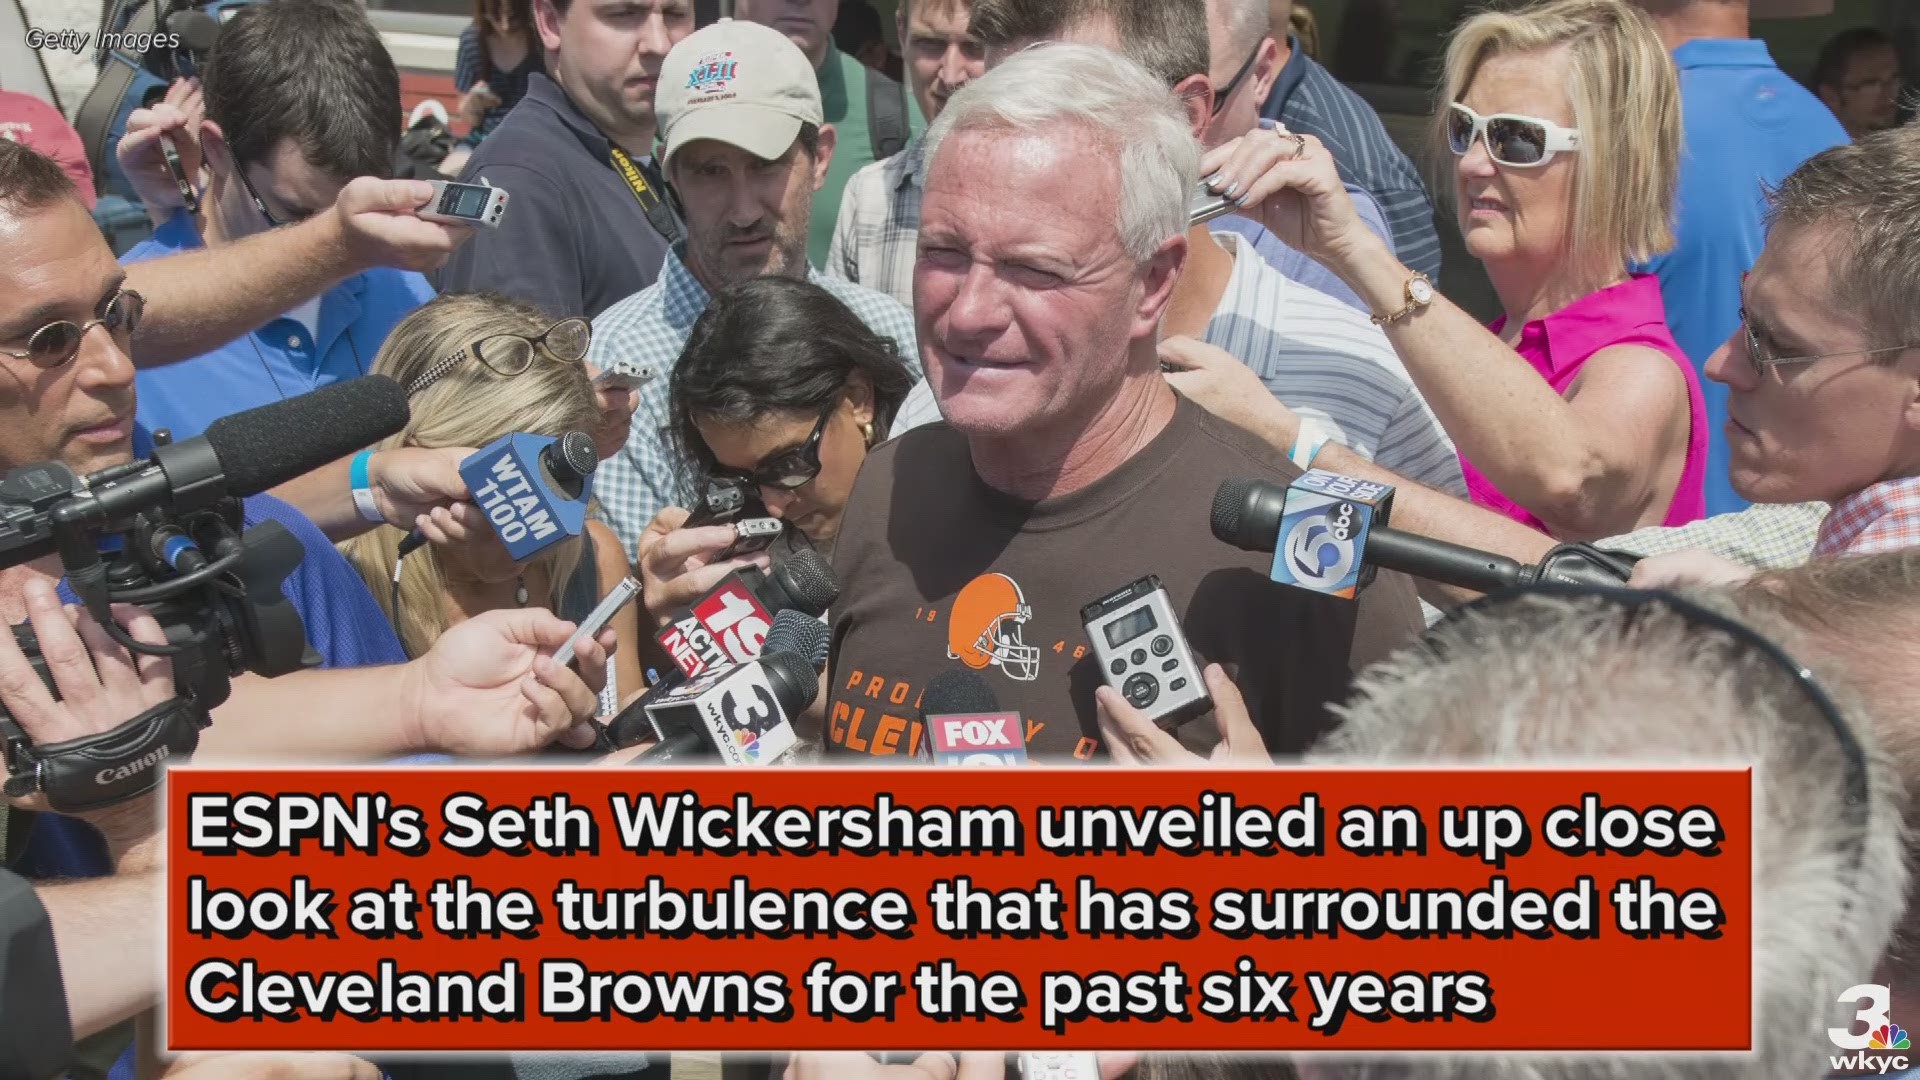 On Thursday, ESPN's Seth Wickersham unveiled an up close look at the turbulence that has surrounded the Cleveland Browns for the past six years.